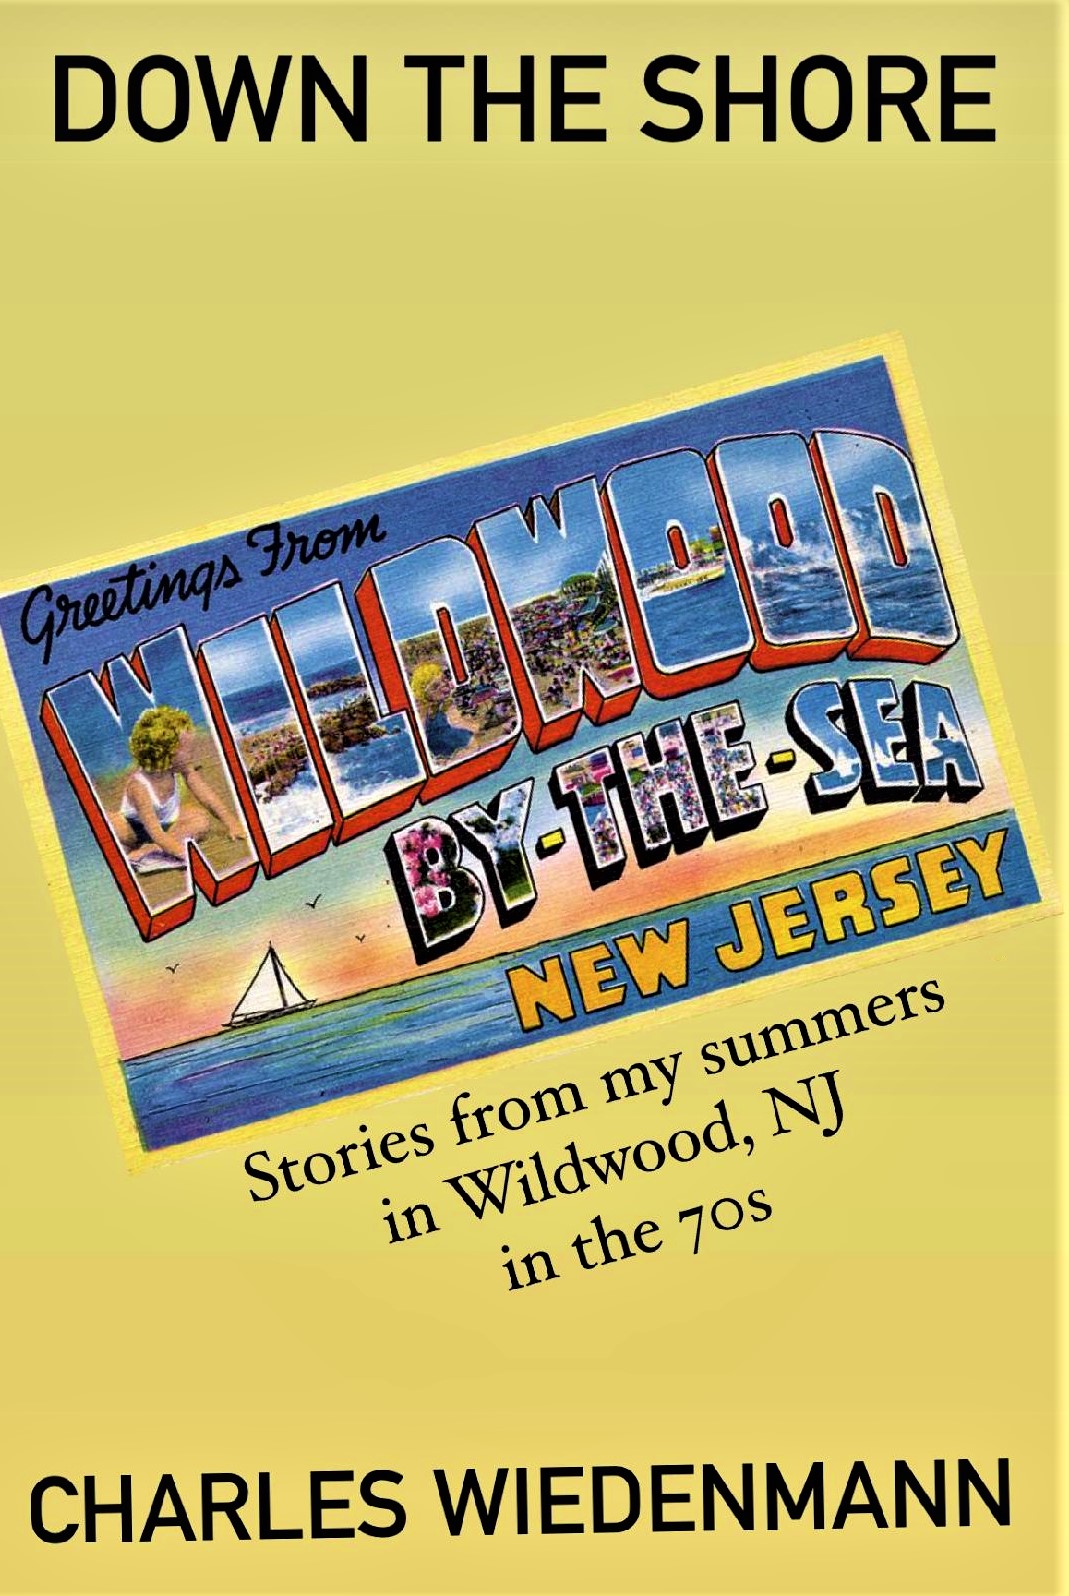 Step into Nostalgia: An Evening at the Newfield Public Library